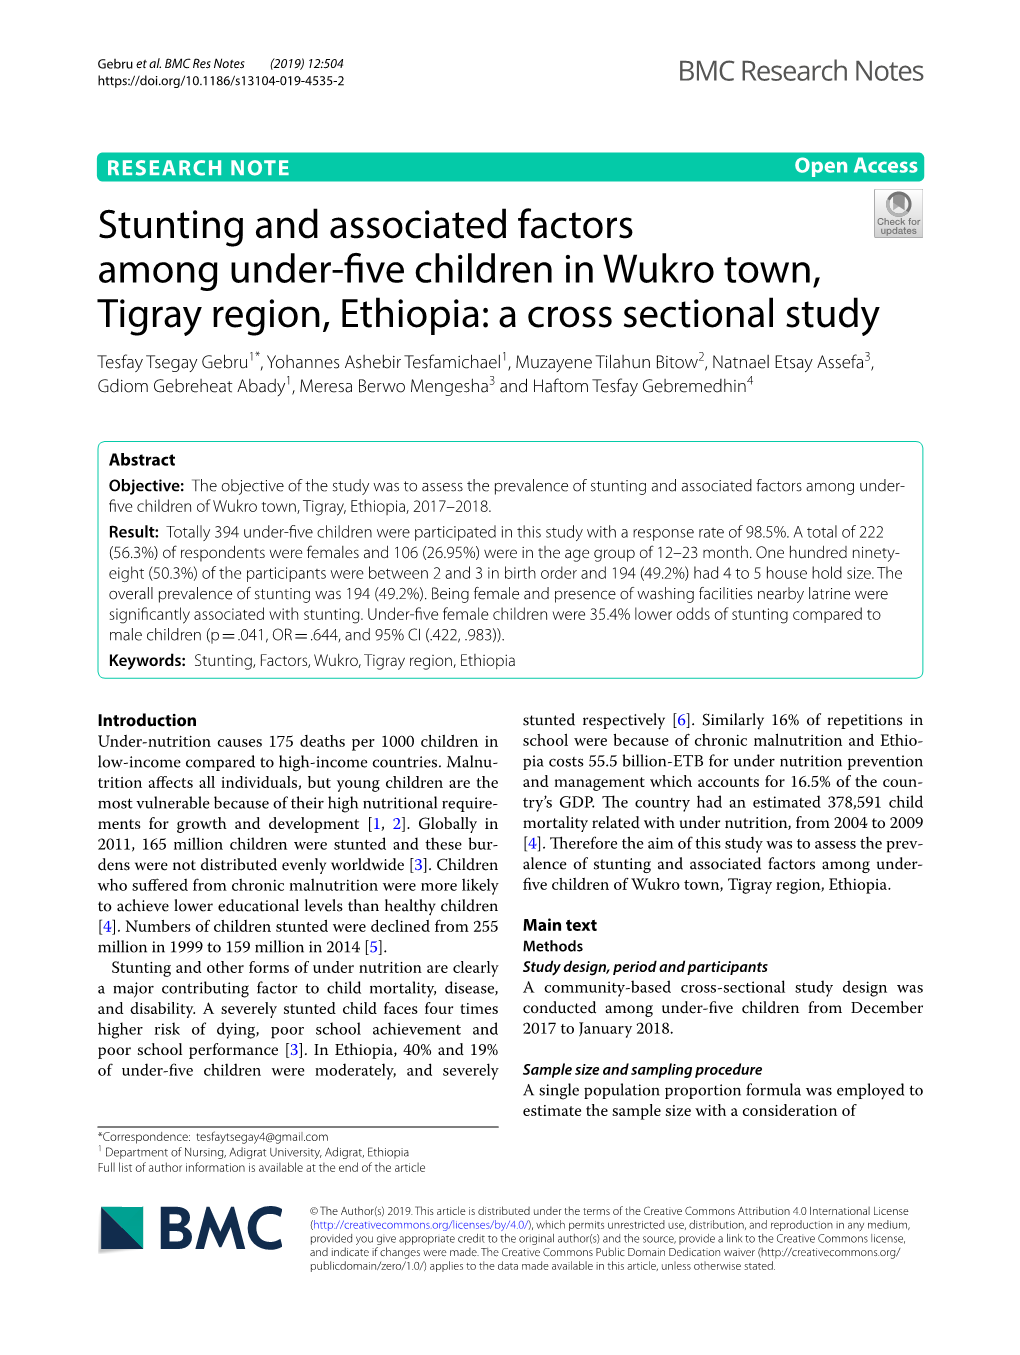 Stunting and Associated Factors Among Under-Five Children in Wukro Town, Tigray Region, Ethiopia: a Cross Sectional Study